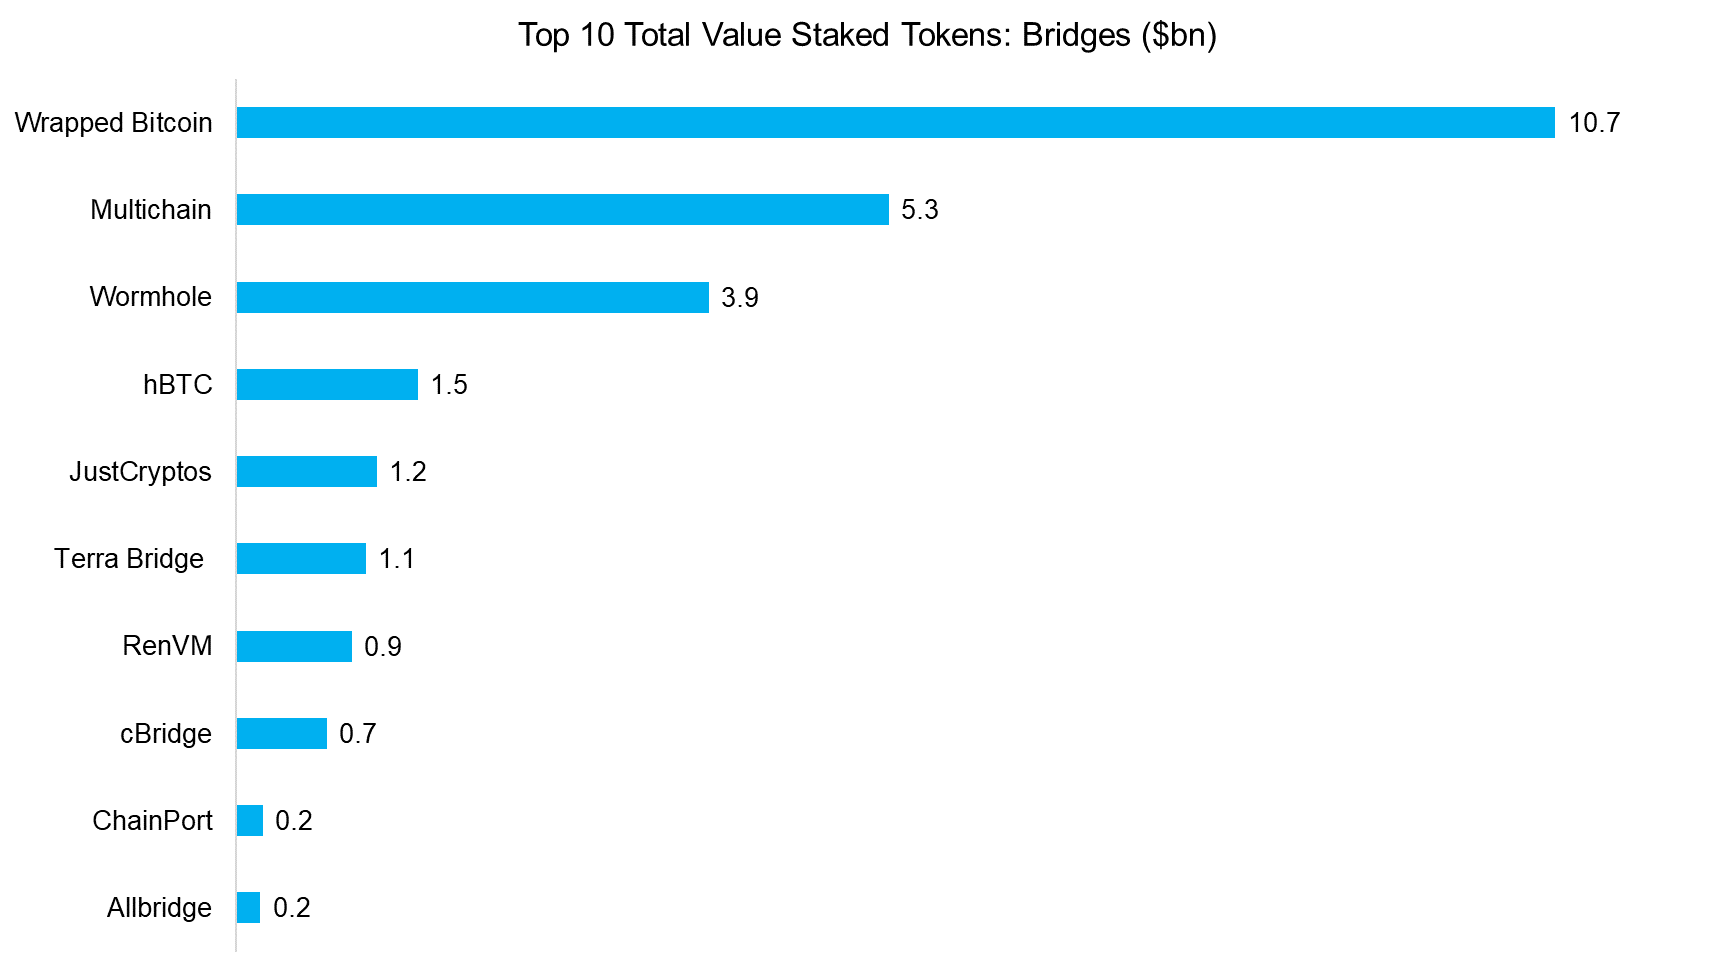 Top 10 Total Value Staked Tokens: Bridges ($bn)